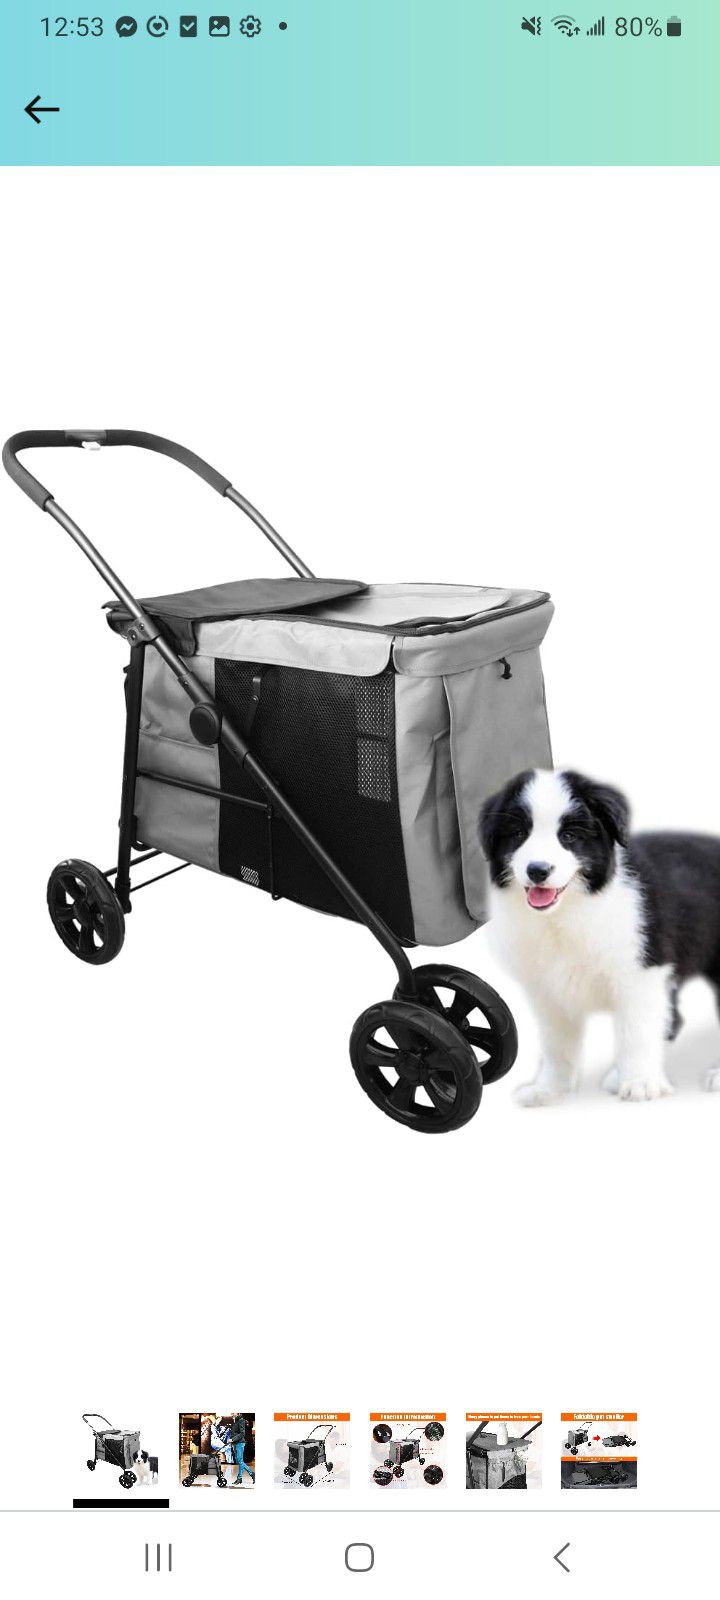 Perfect for Medium to Large Dogs - Foldable 4-Wheel Dog Stroller Medium to Large Dogs up to 135 lbs, Breathable Mesh- Ideal Pet Travel Jogger for Your